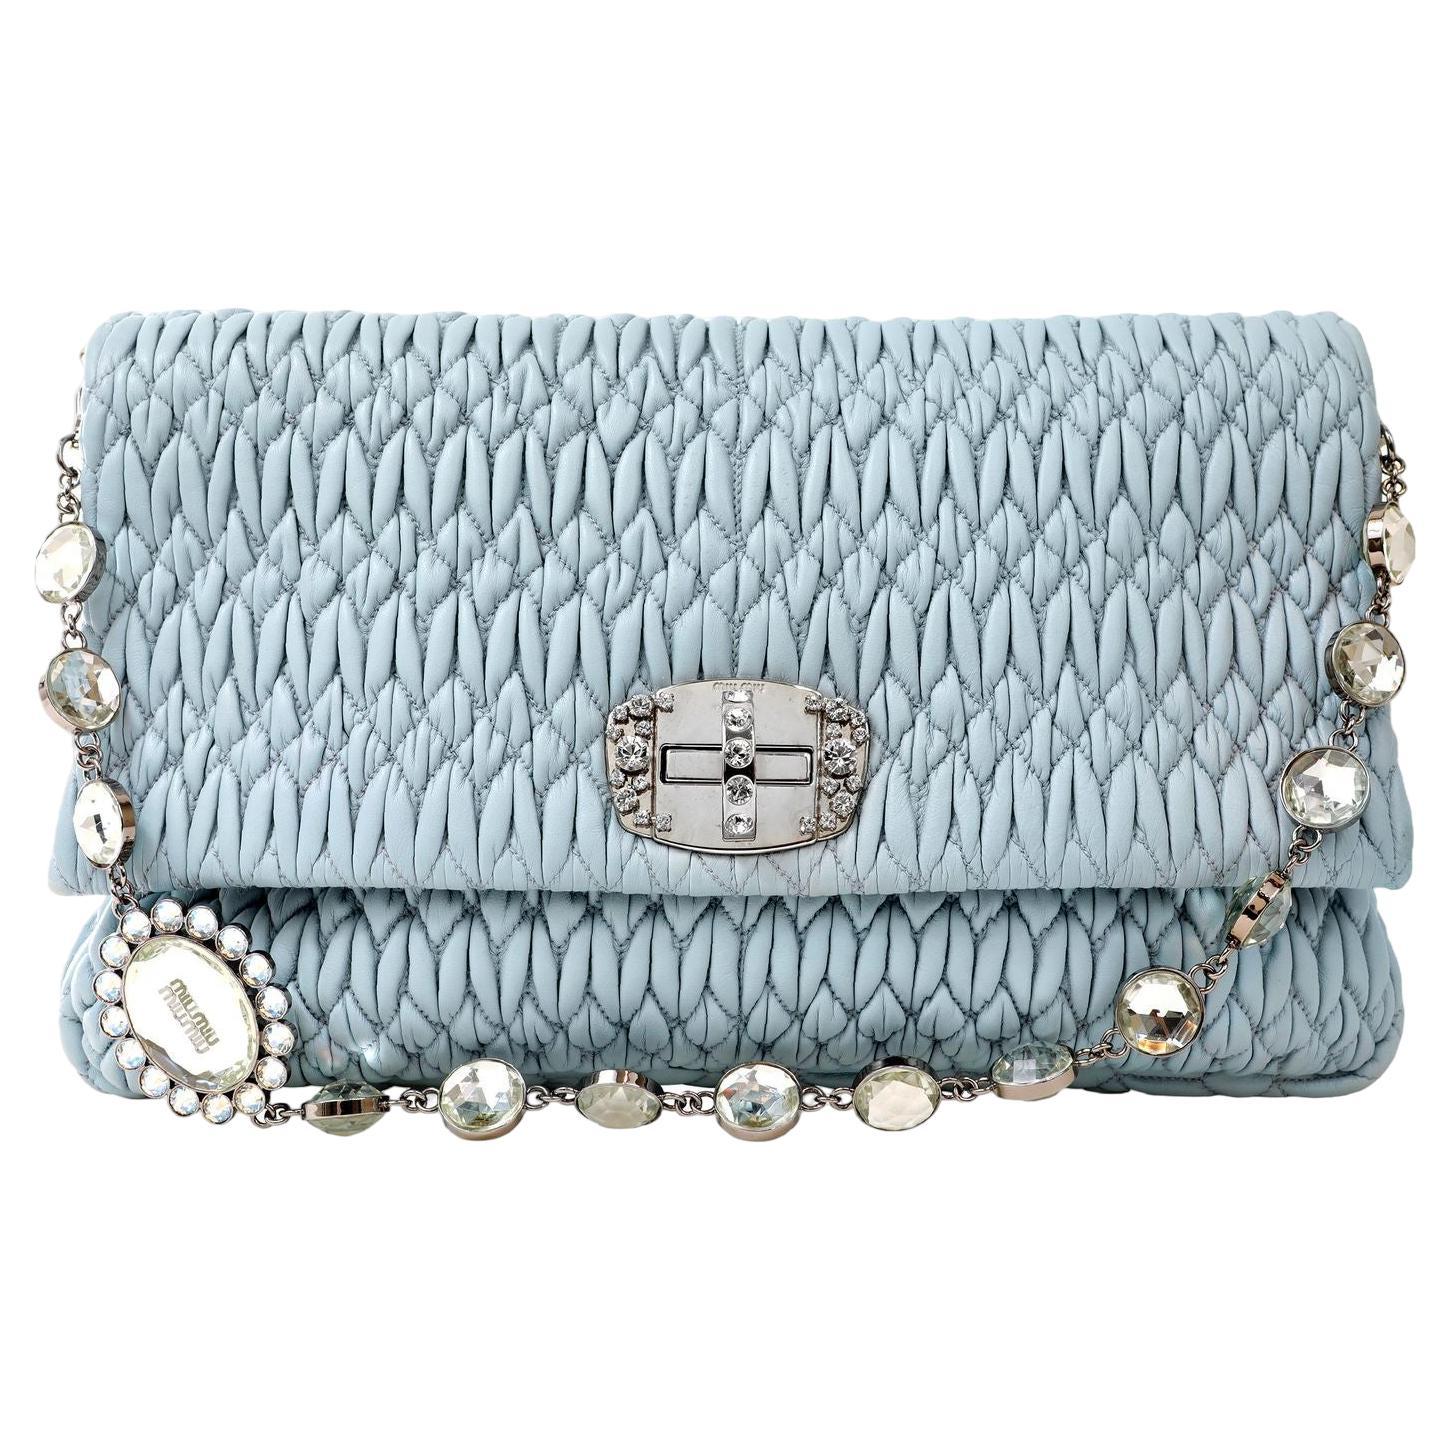 Miu Miu Dusty Blue Iconic Crystal Cloquè Large Bag with Silver Hardware For Sale